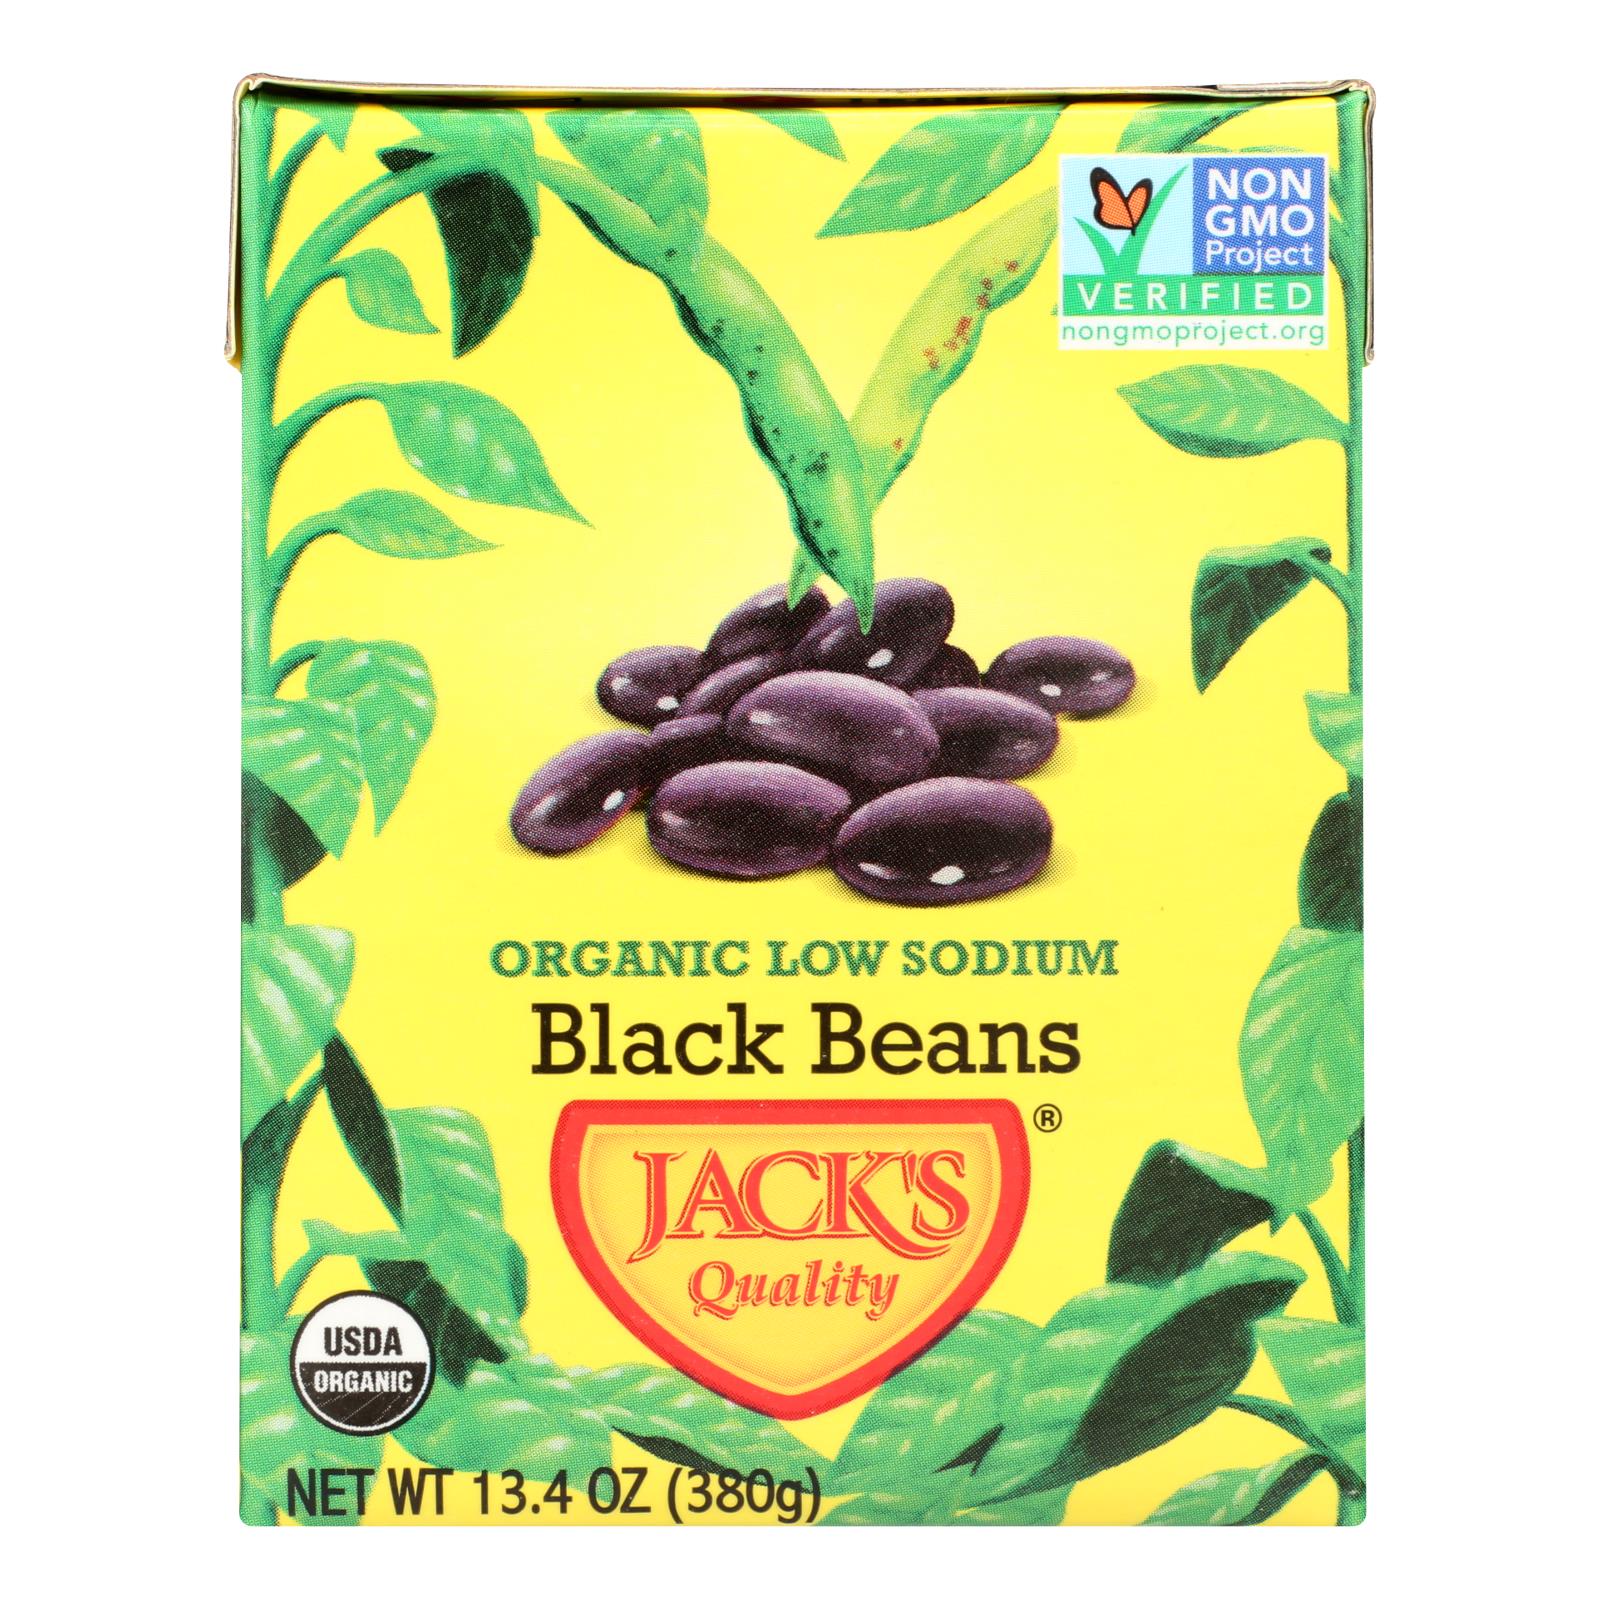 Jack's Quality Organic Black Beans - Low Sodium - Case Of 8 - 13.4 Oz - Whole Green Foods